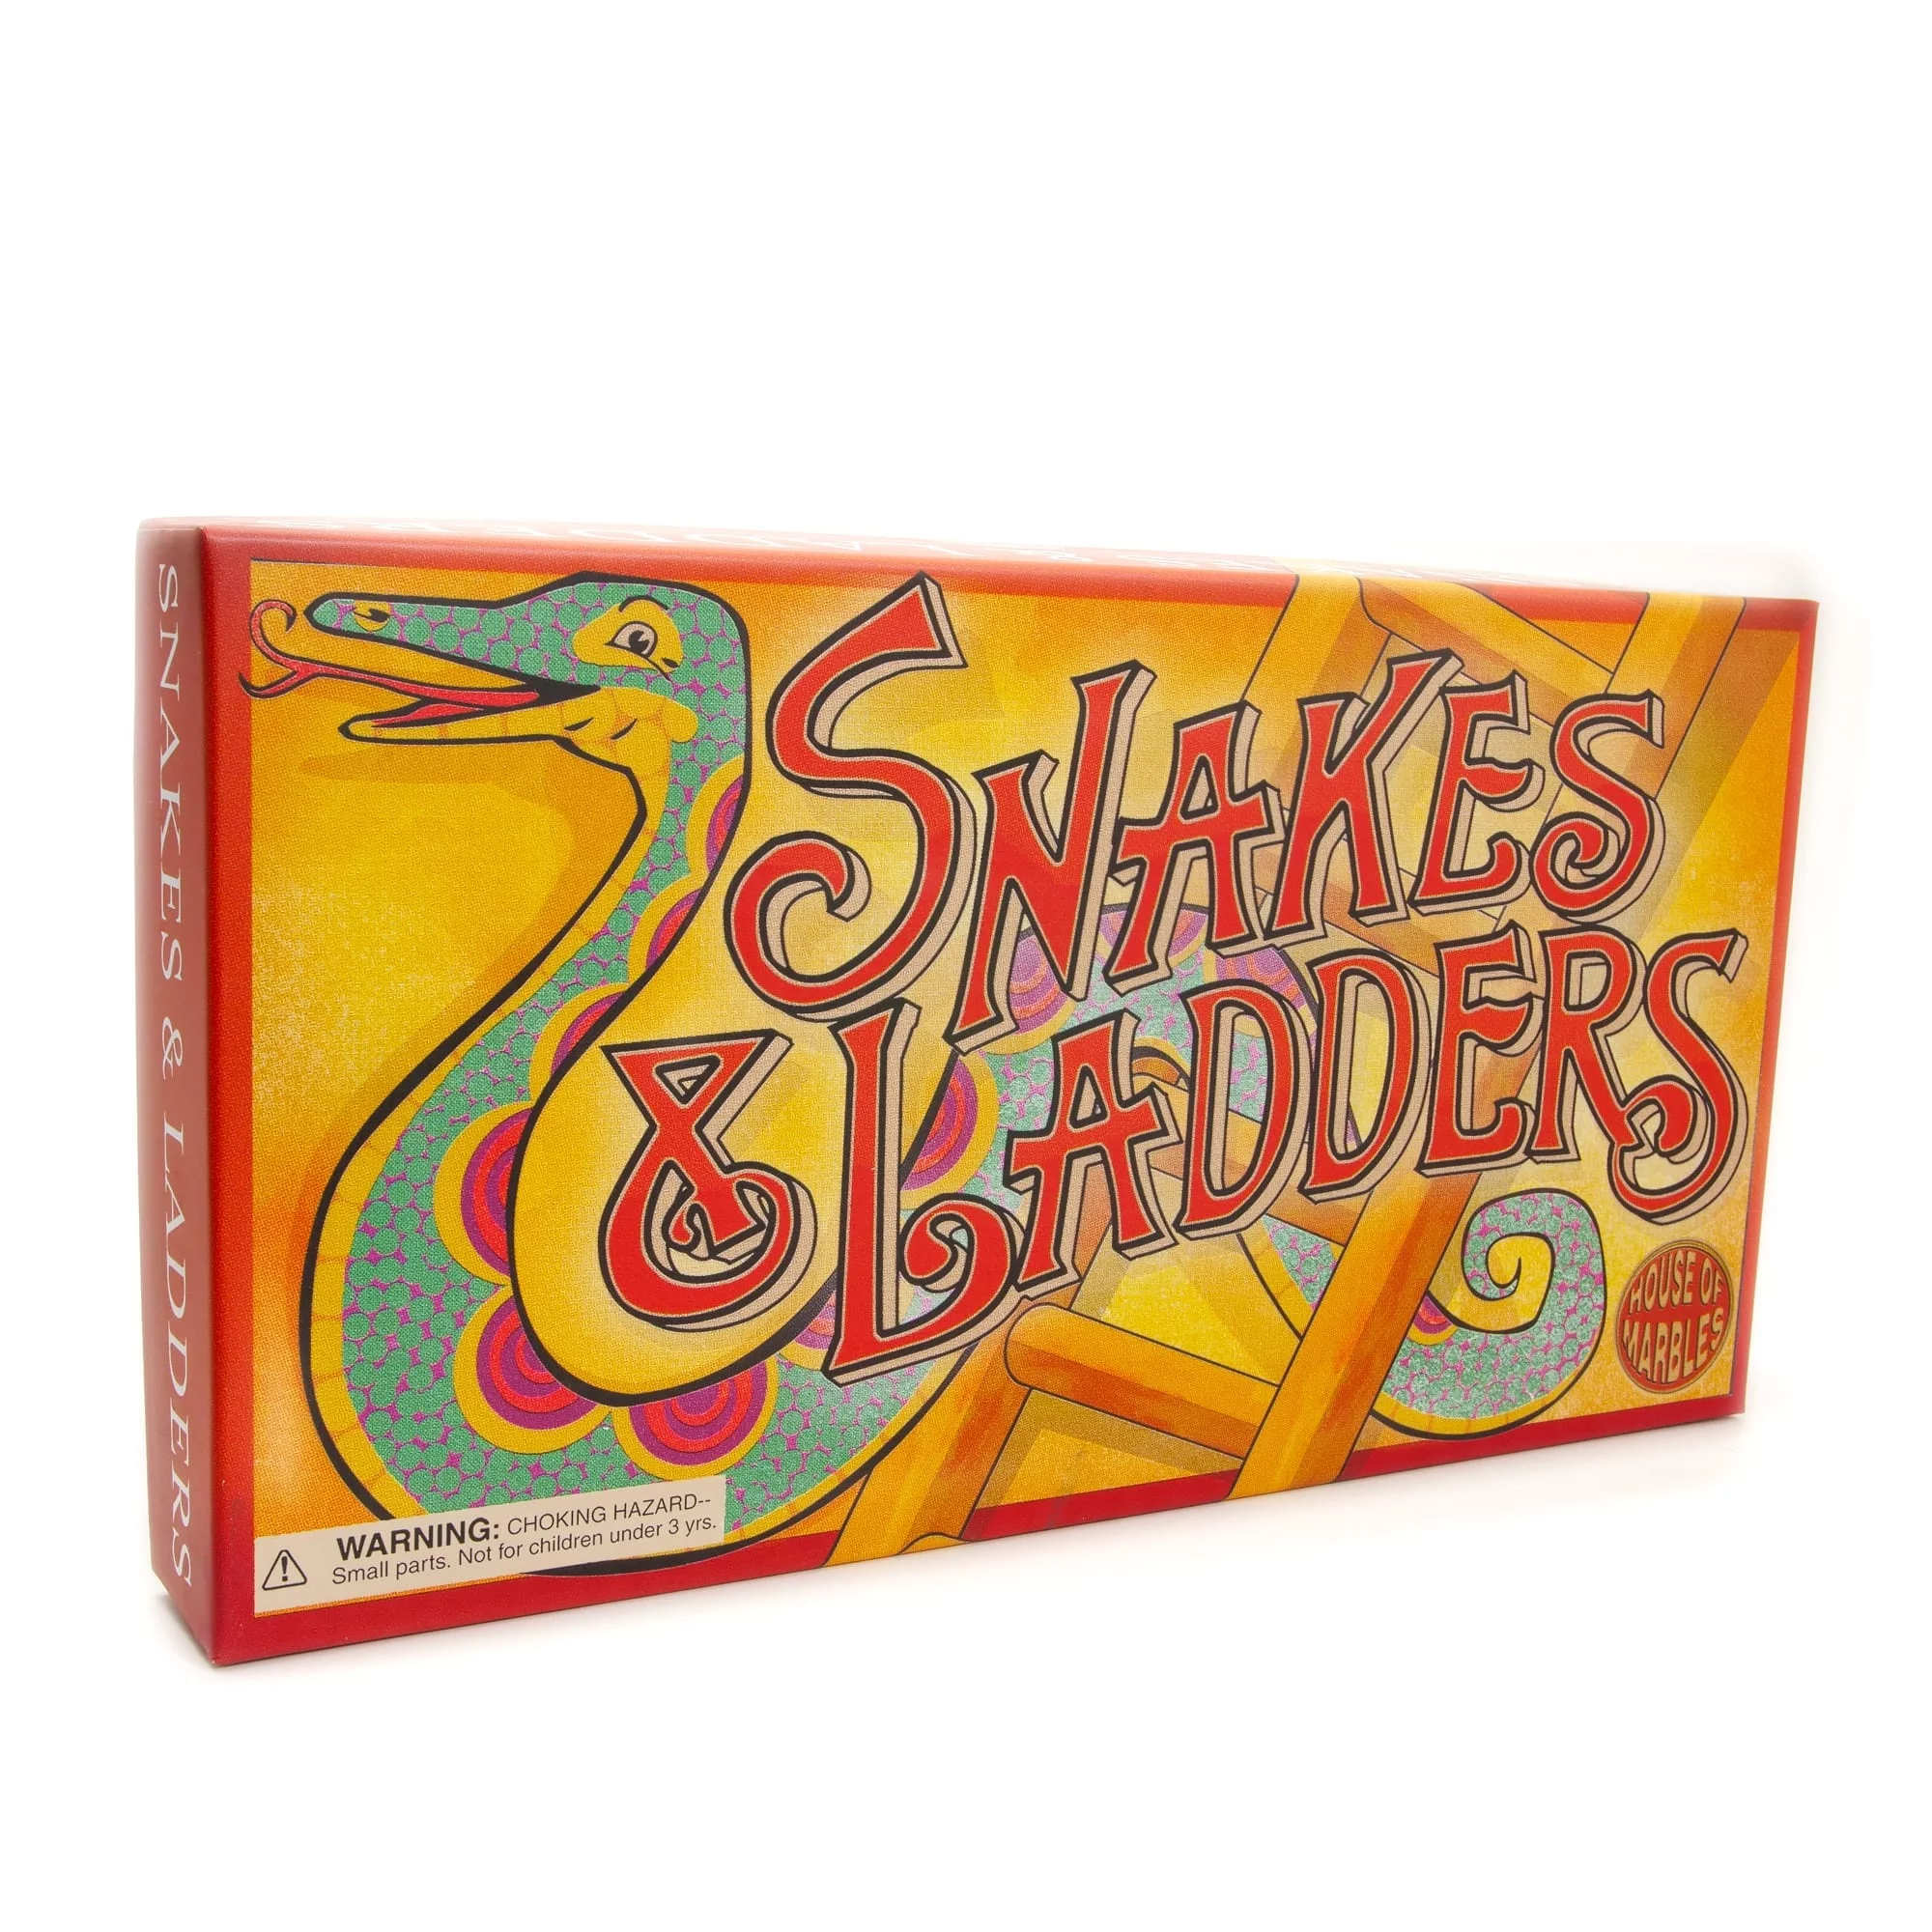 House Of Marbles Vintage Snakes & Ladders